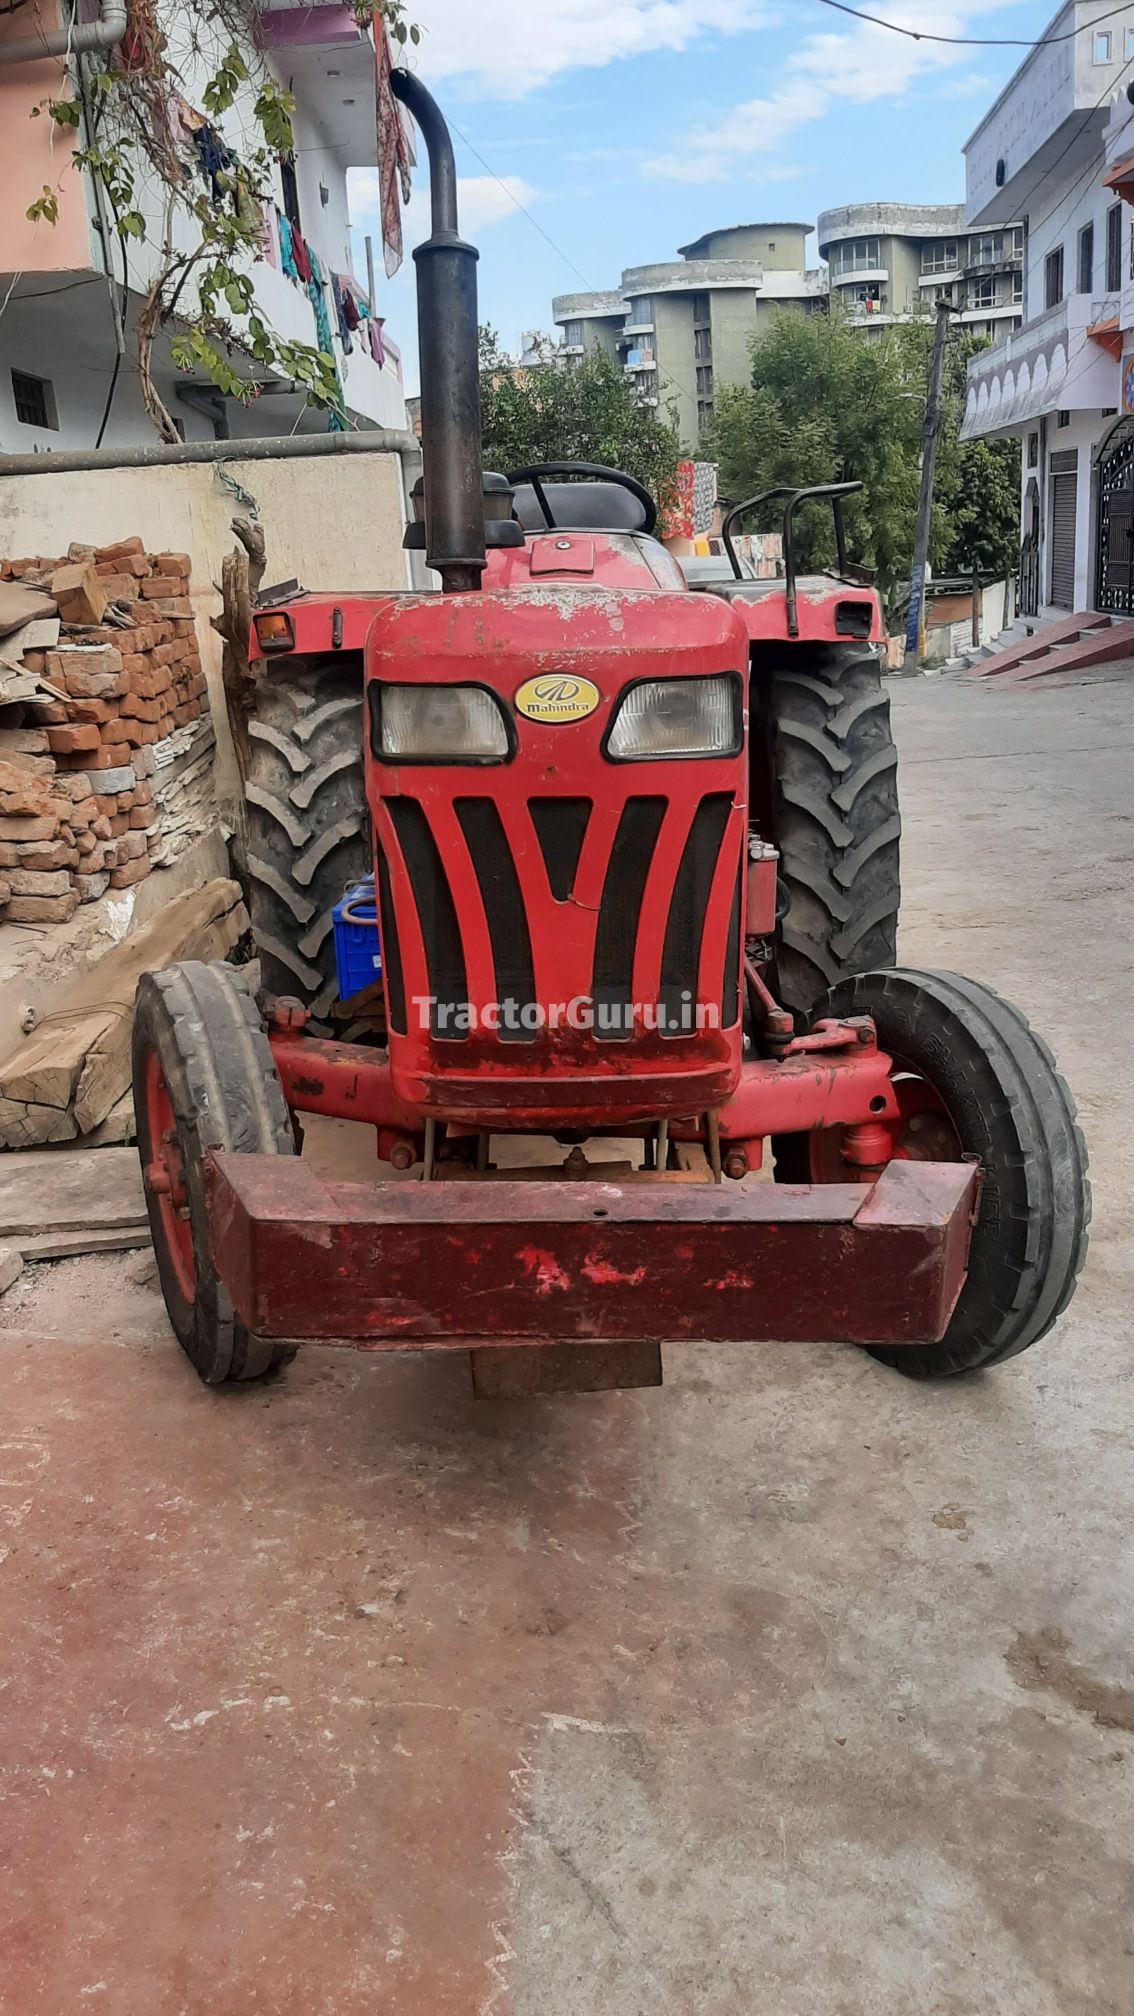 Get Second Hand Mahindra 275 DI BHOOMIPUTRA Tractor in Good Condition ...